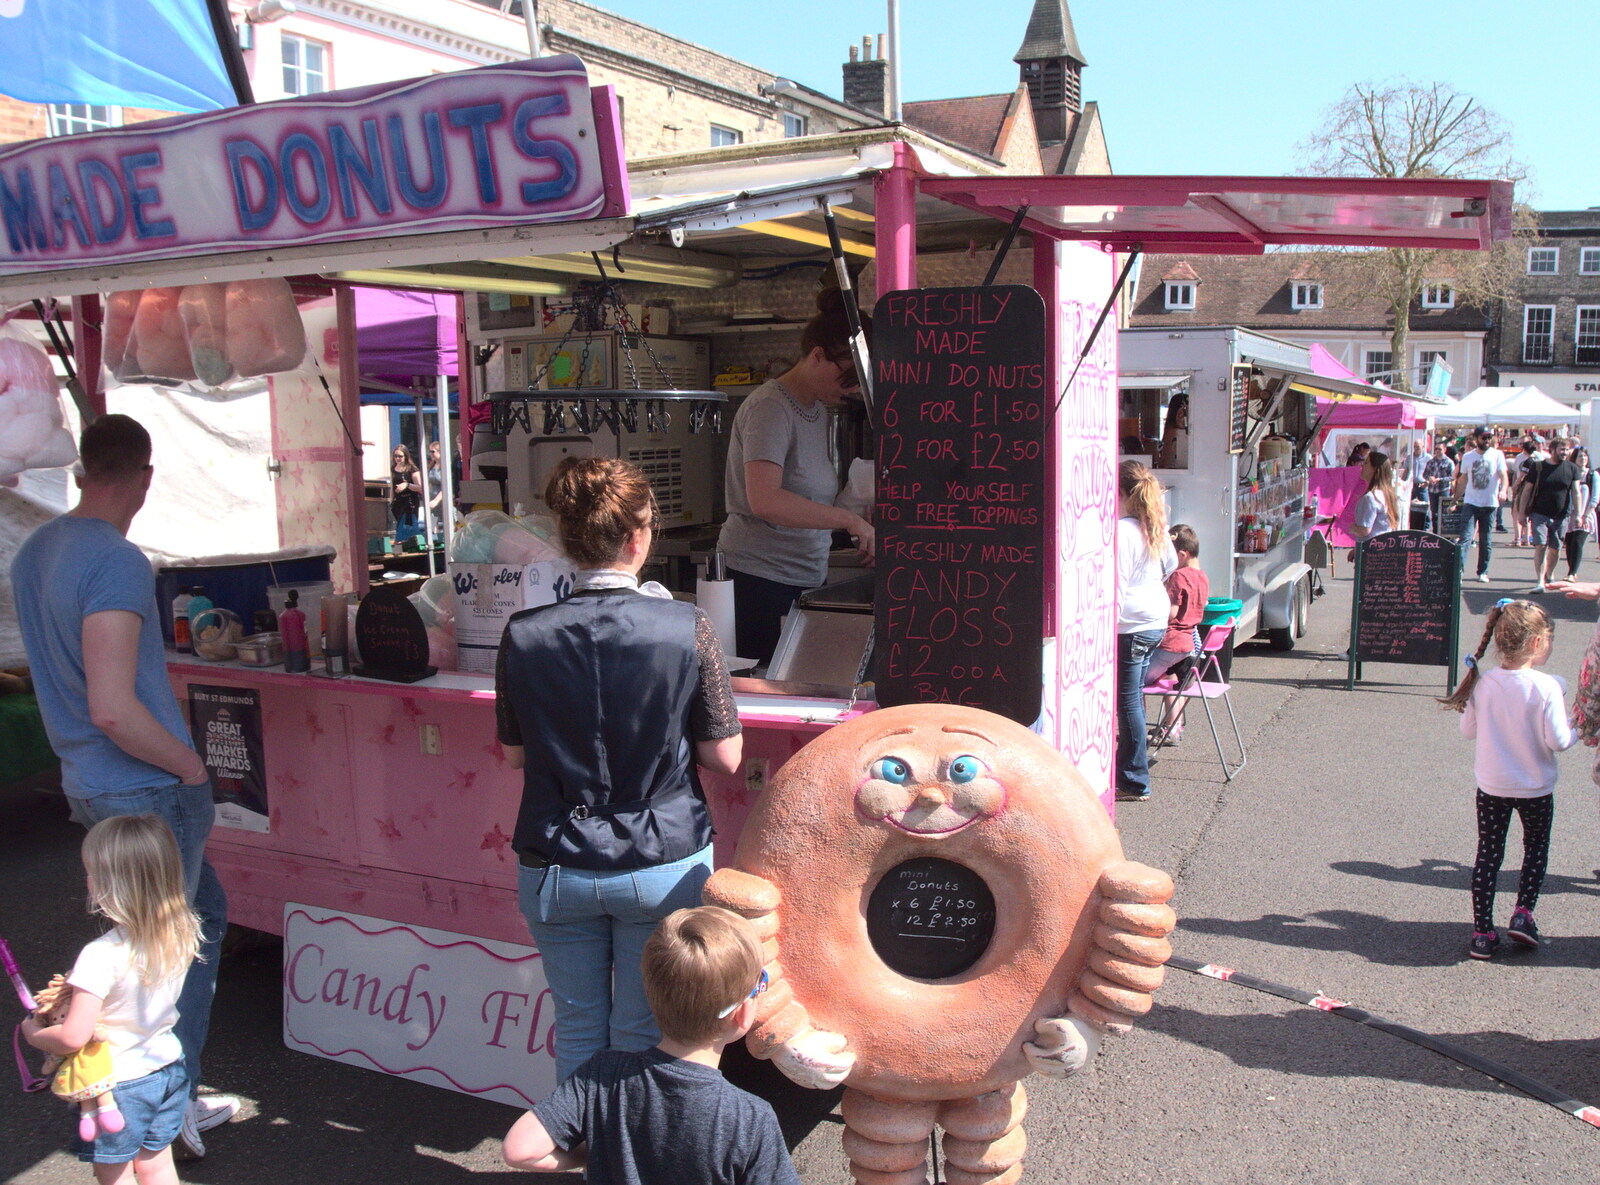 Suey gets some doughnuts from The East Anglian Beer Festival, Bury St. Edmunds, Suffolk - 21st April 2018